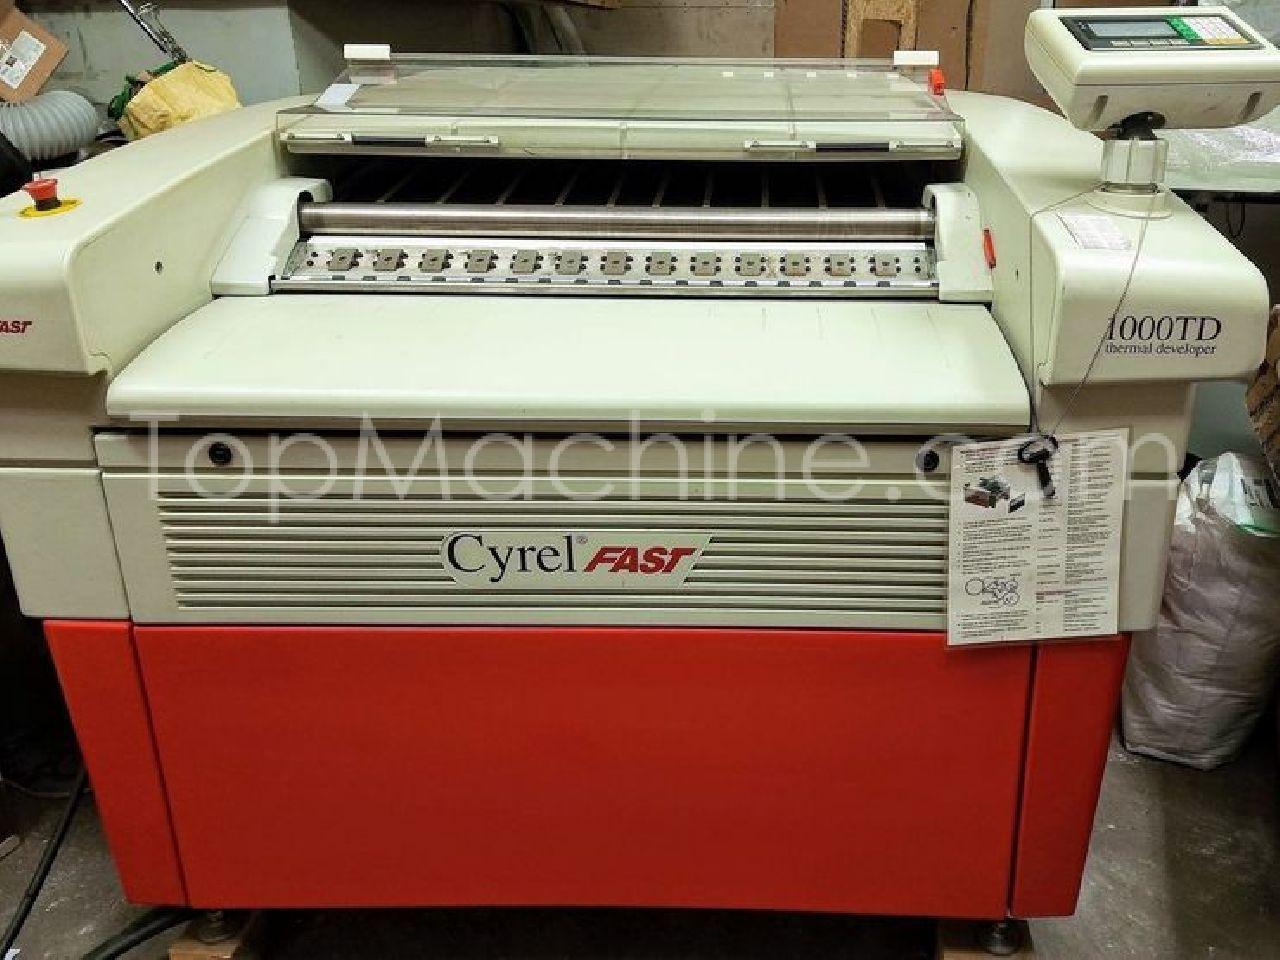 Used DuPont Cyrel Fast 1000 TD Film & Print Miscellaneous